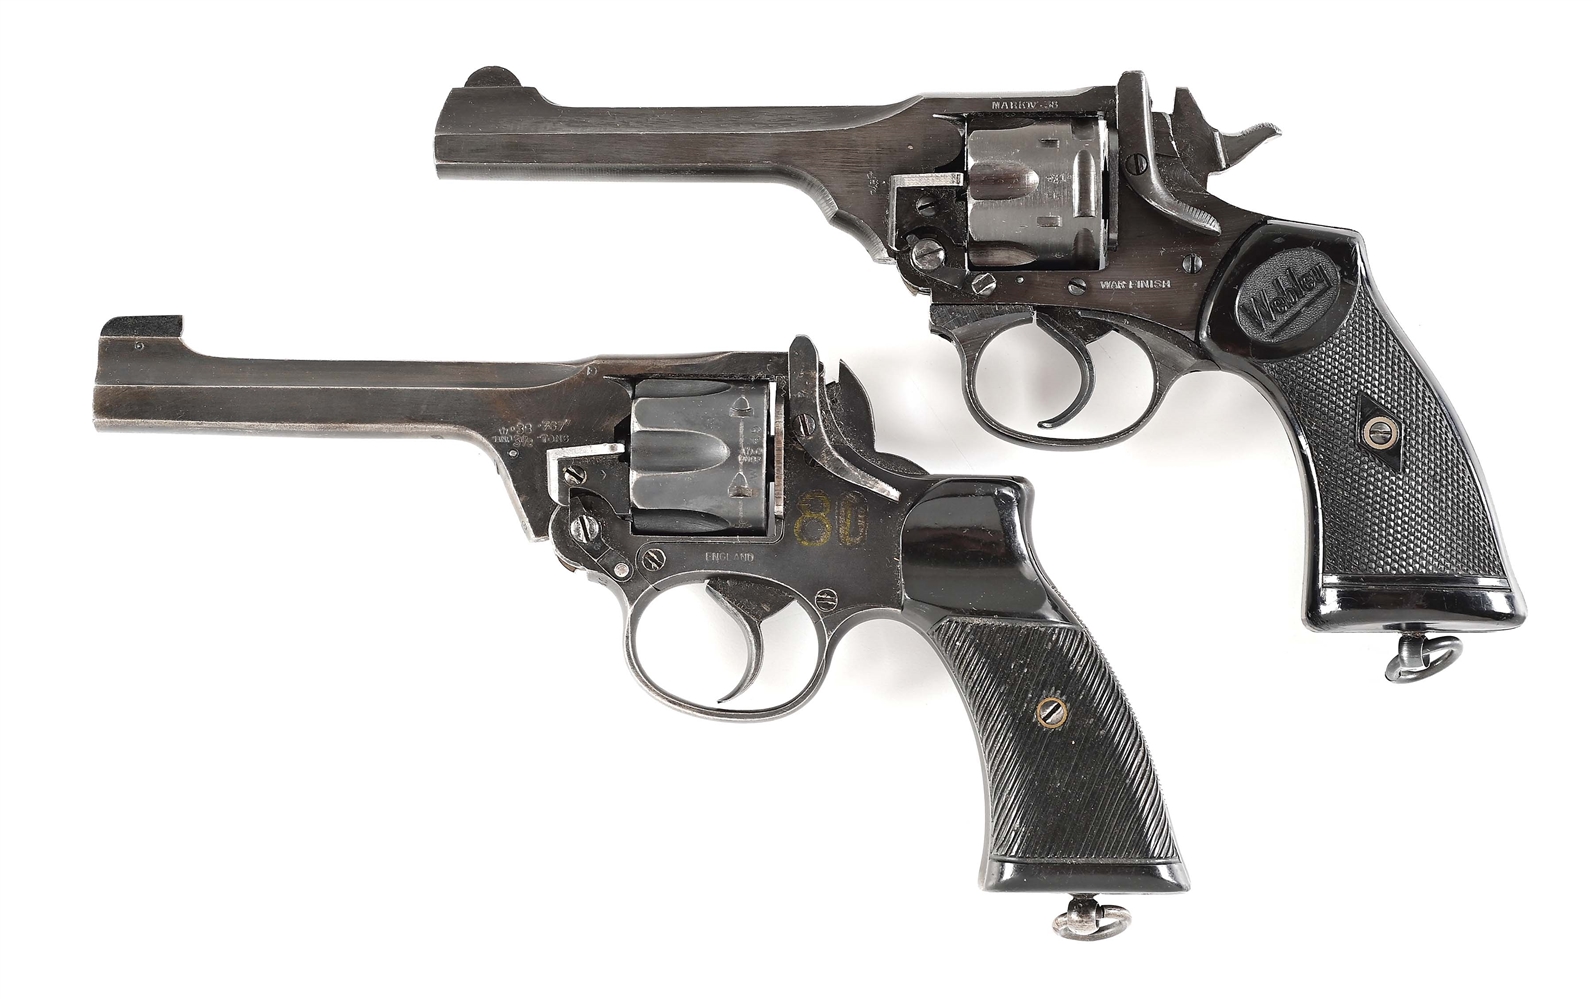 LOT OF 2: WEBLEY MK IV AND ALBION ENFIELD NO. 2 MK 1 DOUBLE ACTION REVOLVERS.